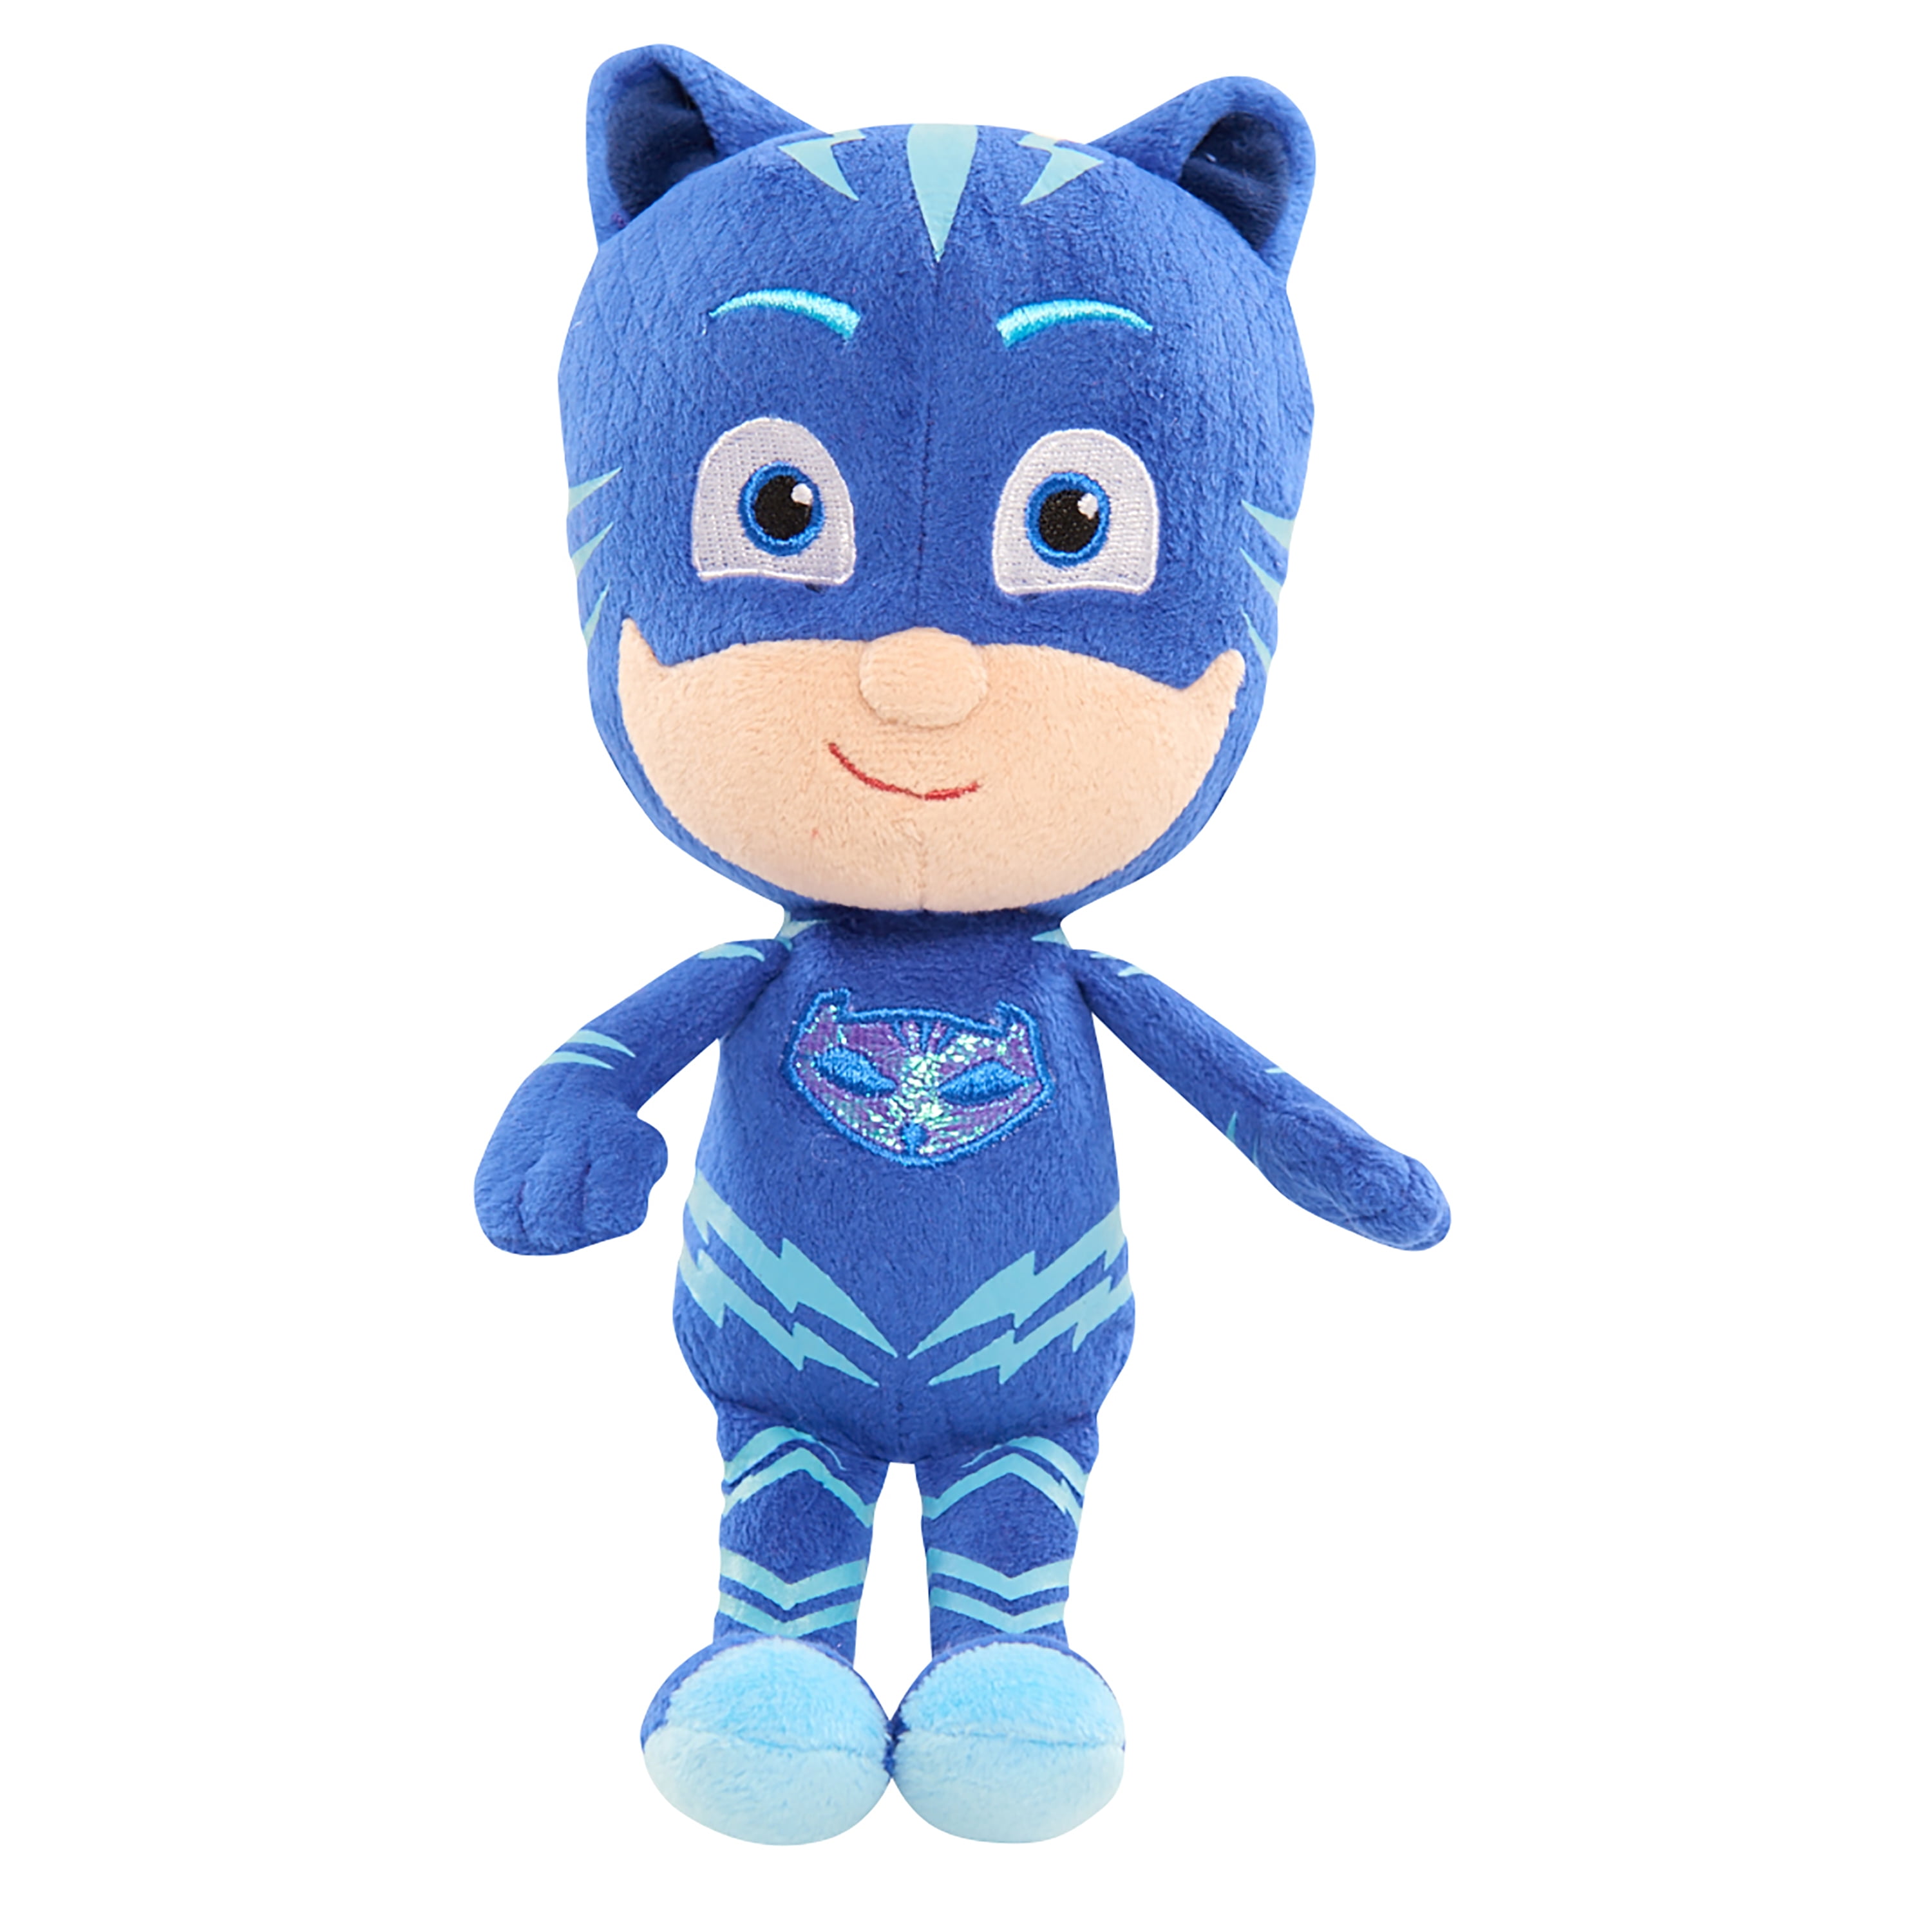 Details about   PJ Masks Catboy 14” Stuffed Plush Lights Up and Sings Blue Talks *SEE VIDEO* 